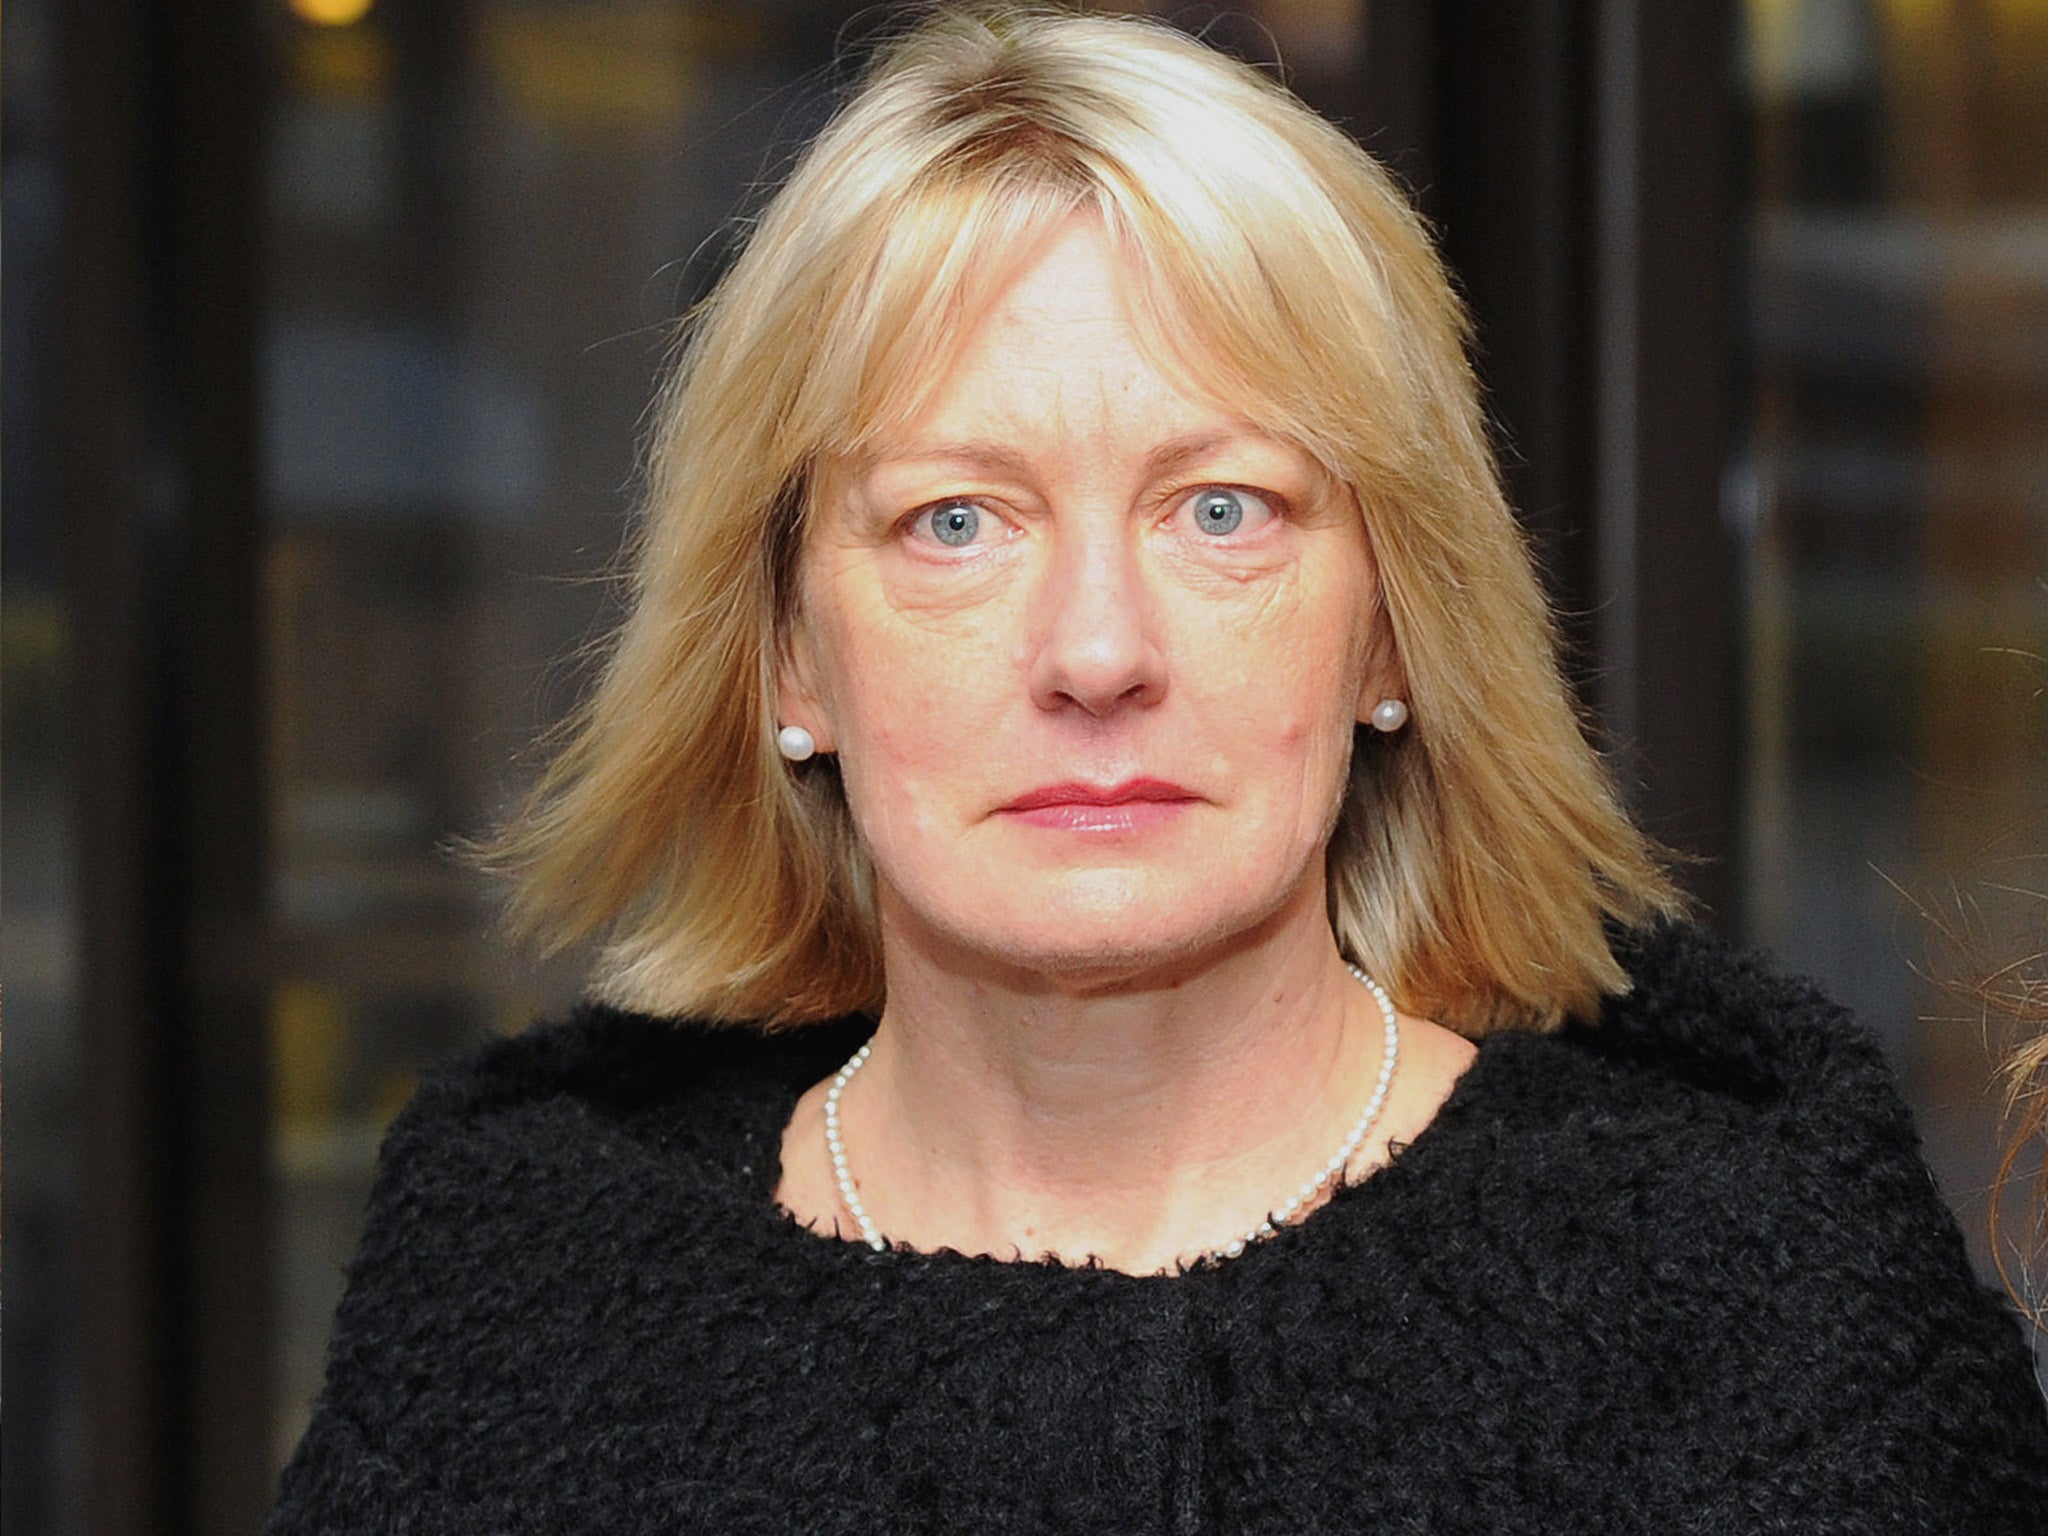 Chetham’s principal Claire Moreland first received complaints in 2002